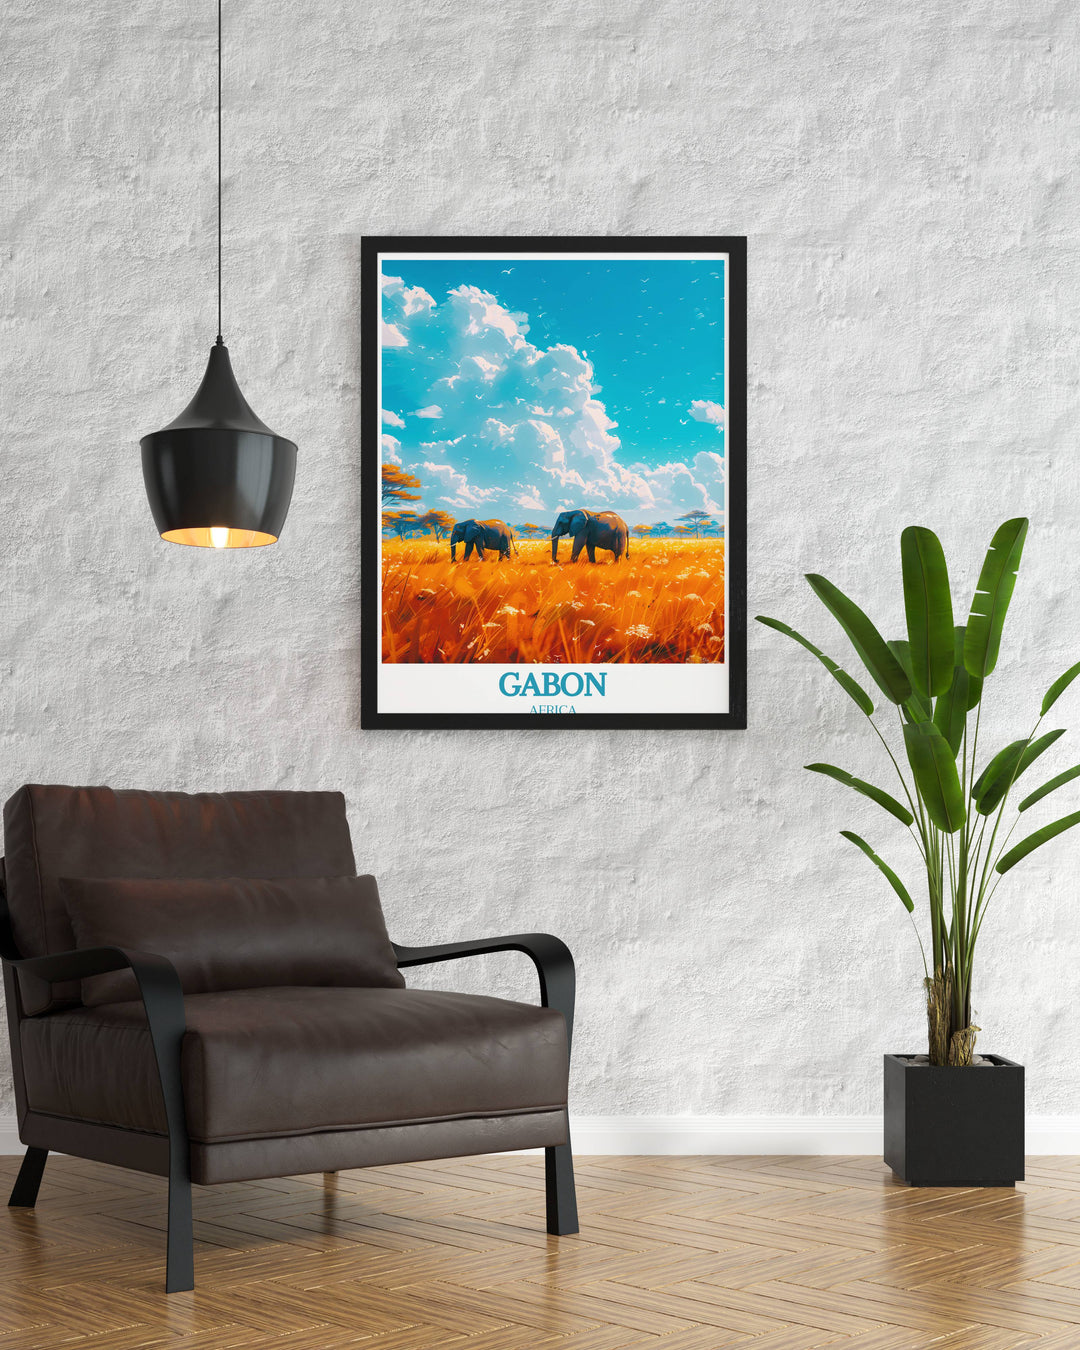 Vibrant artwork featuring Loango National Park and Lopé National Park Print, showcasing Gabons lush landscapes and rich biodiversity in vivid colors.